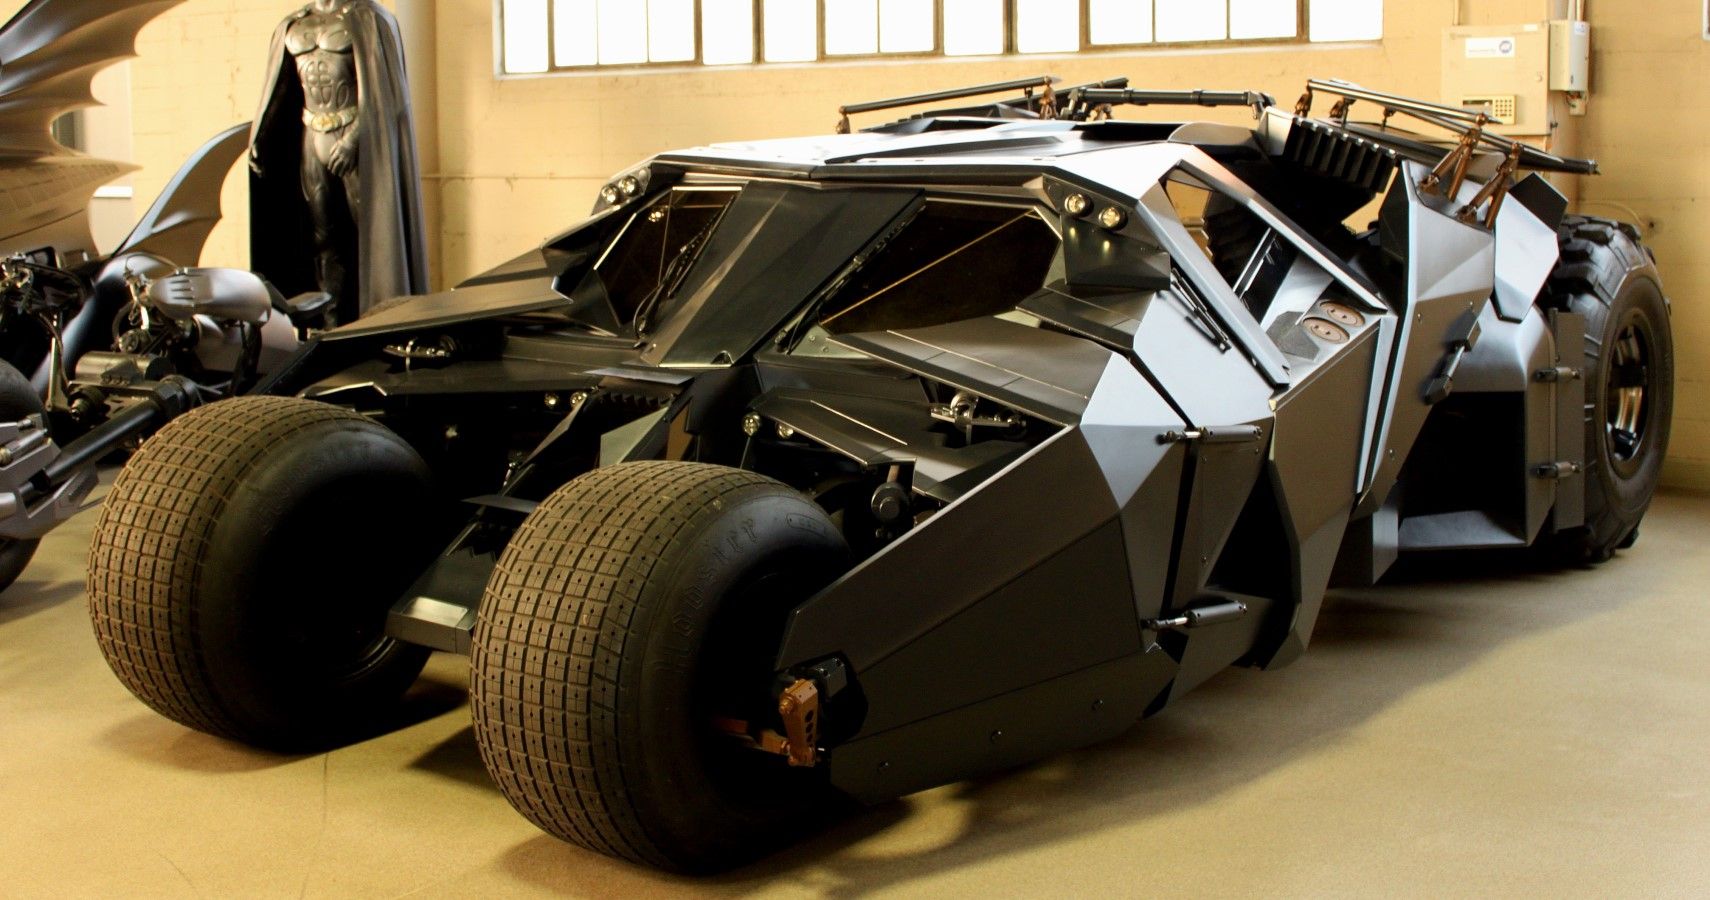 The Batman: Why the New Batmobile is Way Better Than Dark Knight's Tumbler